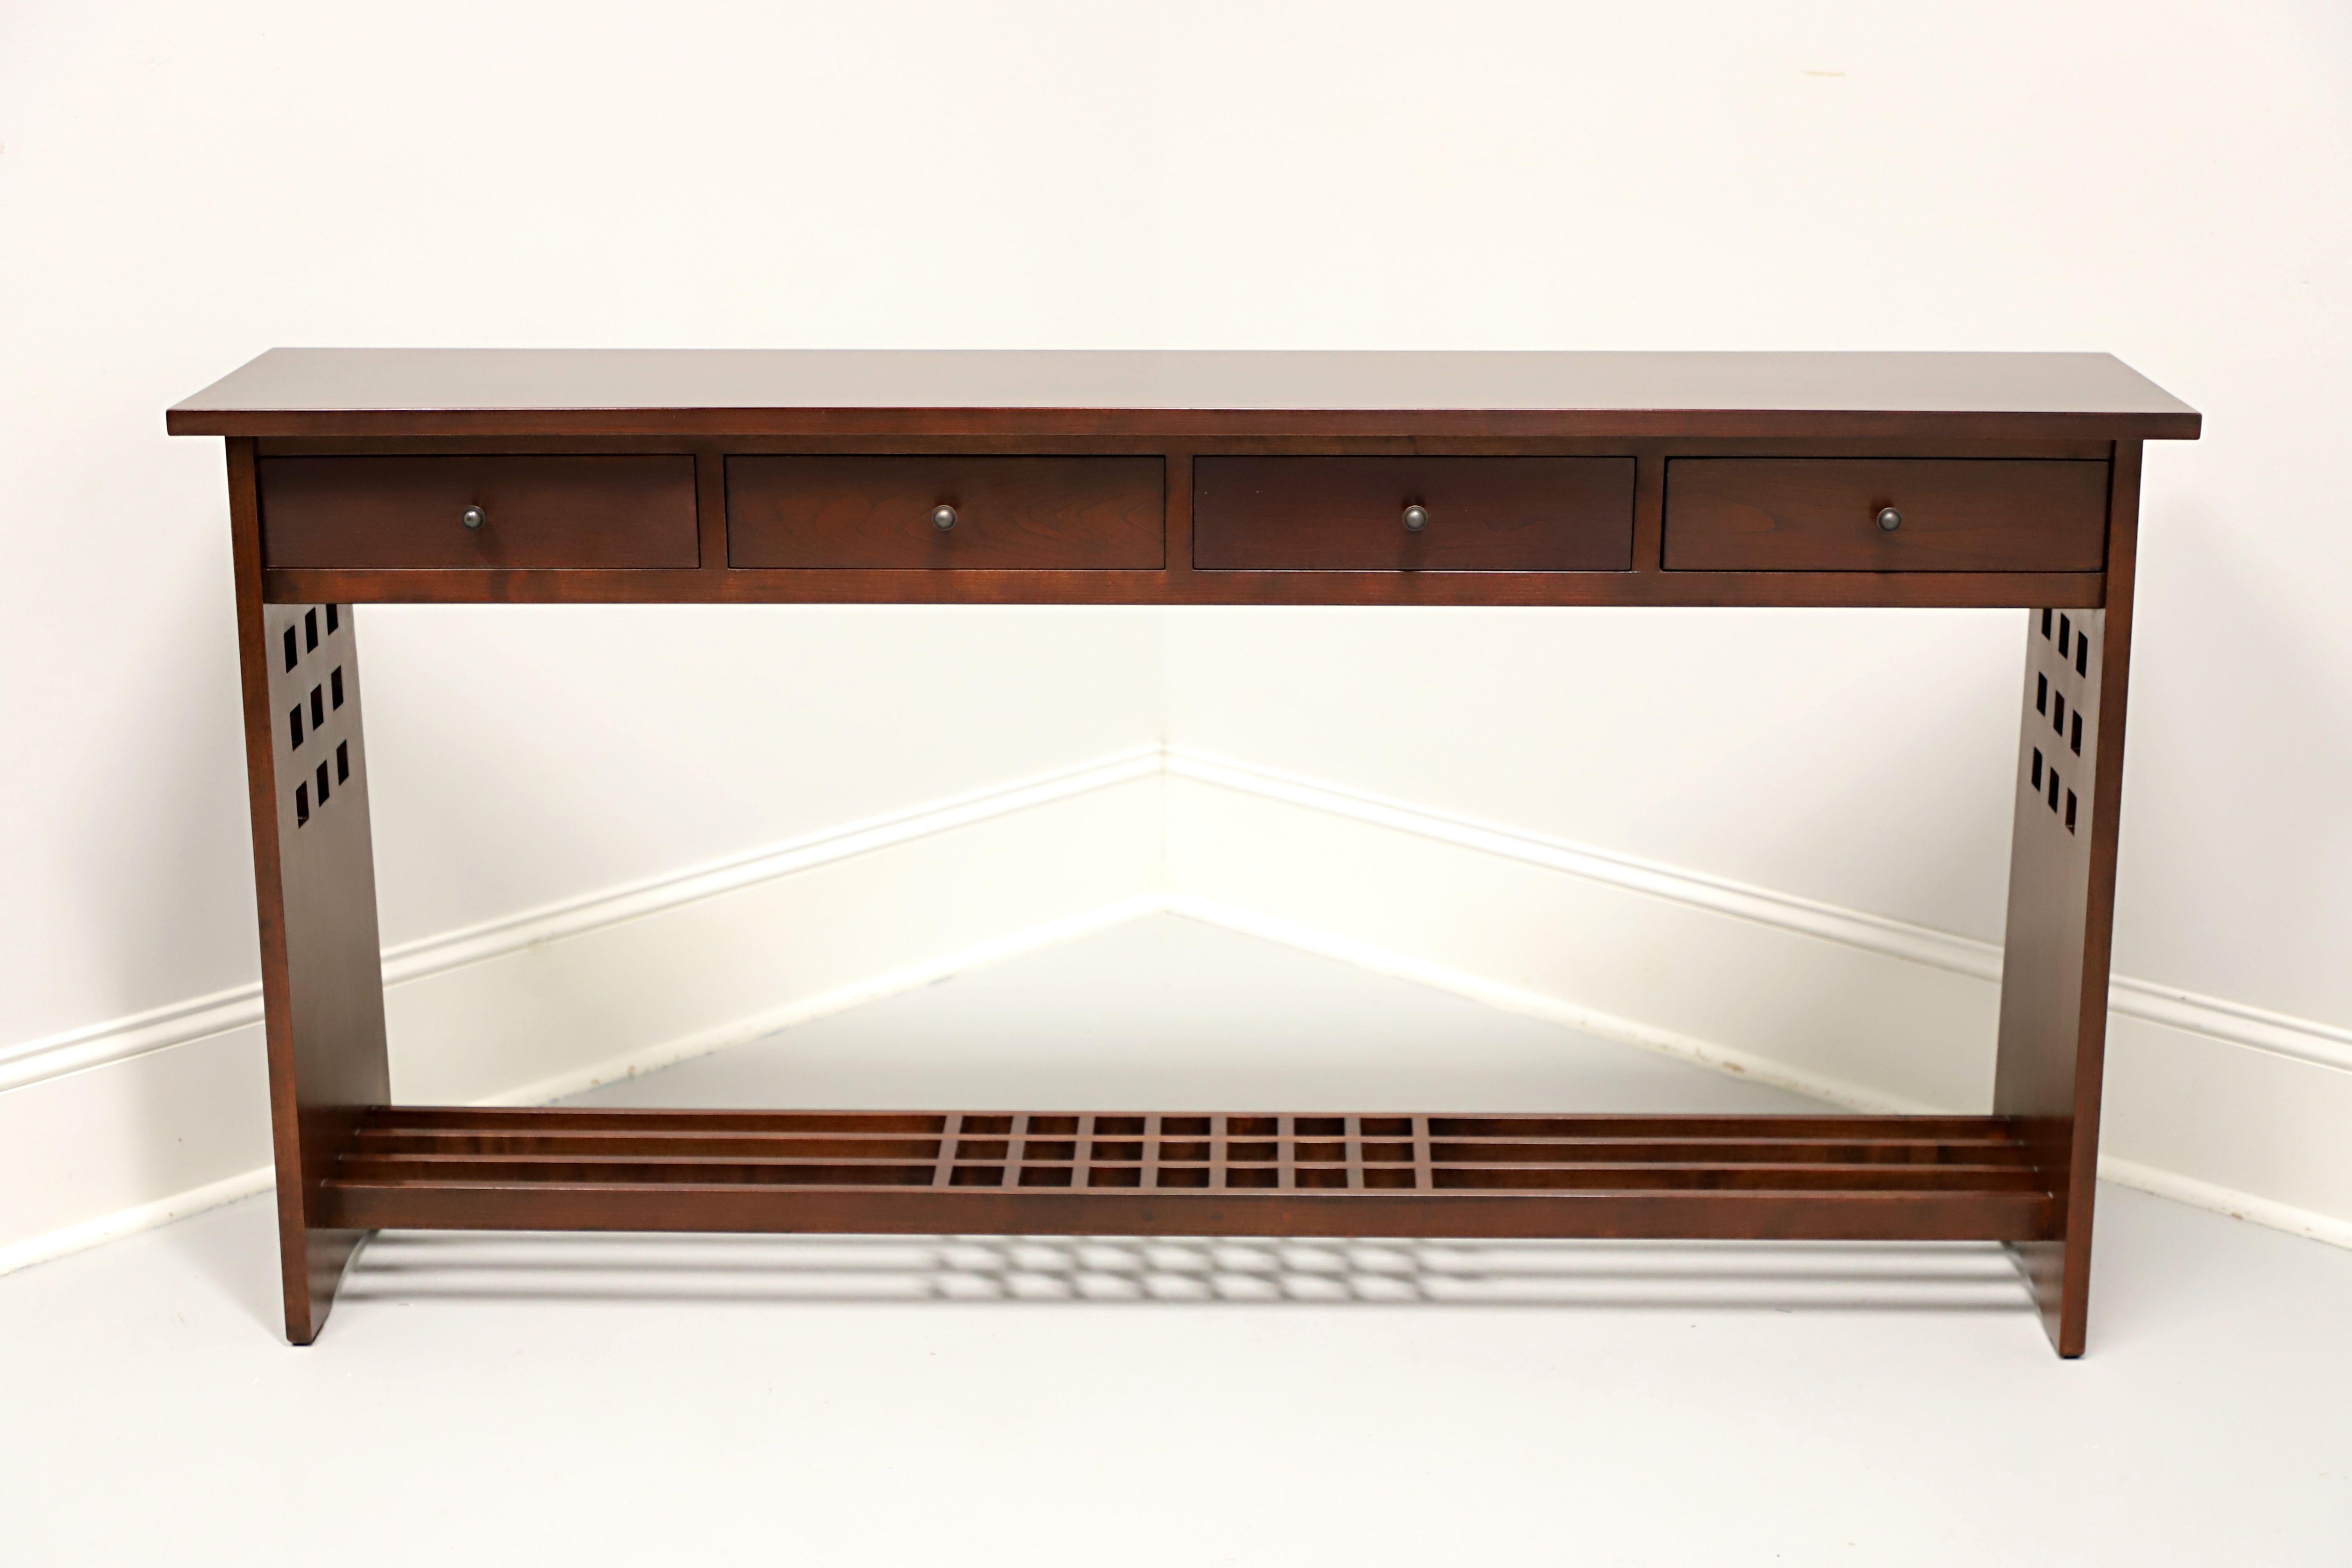 A Glasgow Arts & Crafts style console table by Stickley Furniture, from their Edinburgh Collection. Cherry wood with their Saratoga finish, square edge to top, dark copper hardware, open slat undertier shelf with decorative open squares design to